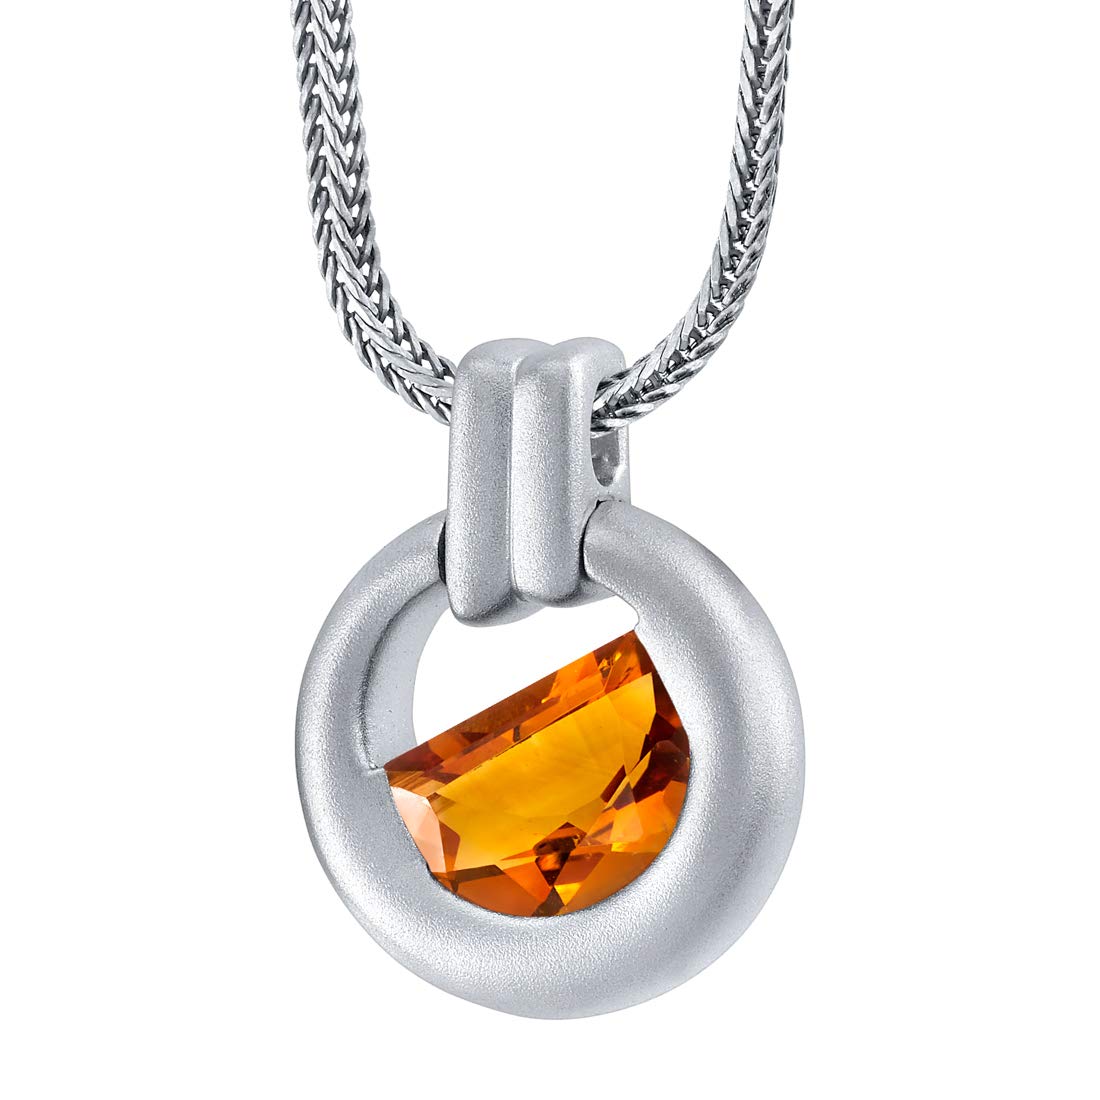 Peora Citrine Amulet Pendant Necklace for Men in Sterling Silver, 3 Carats Half Moon Shape, Brushed Finished, with 22-Inch Italian Chain